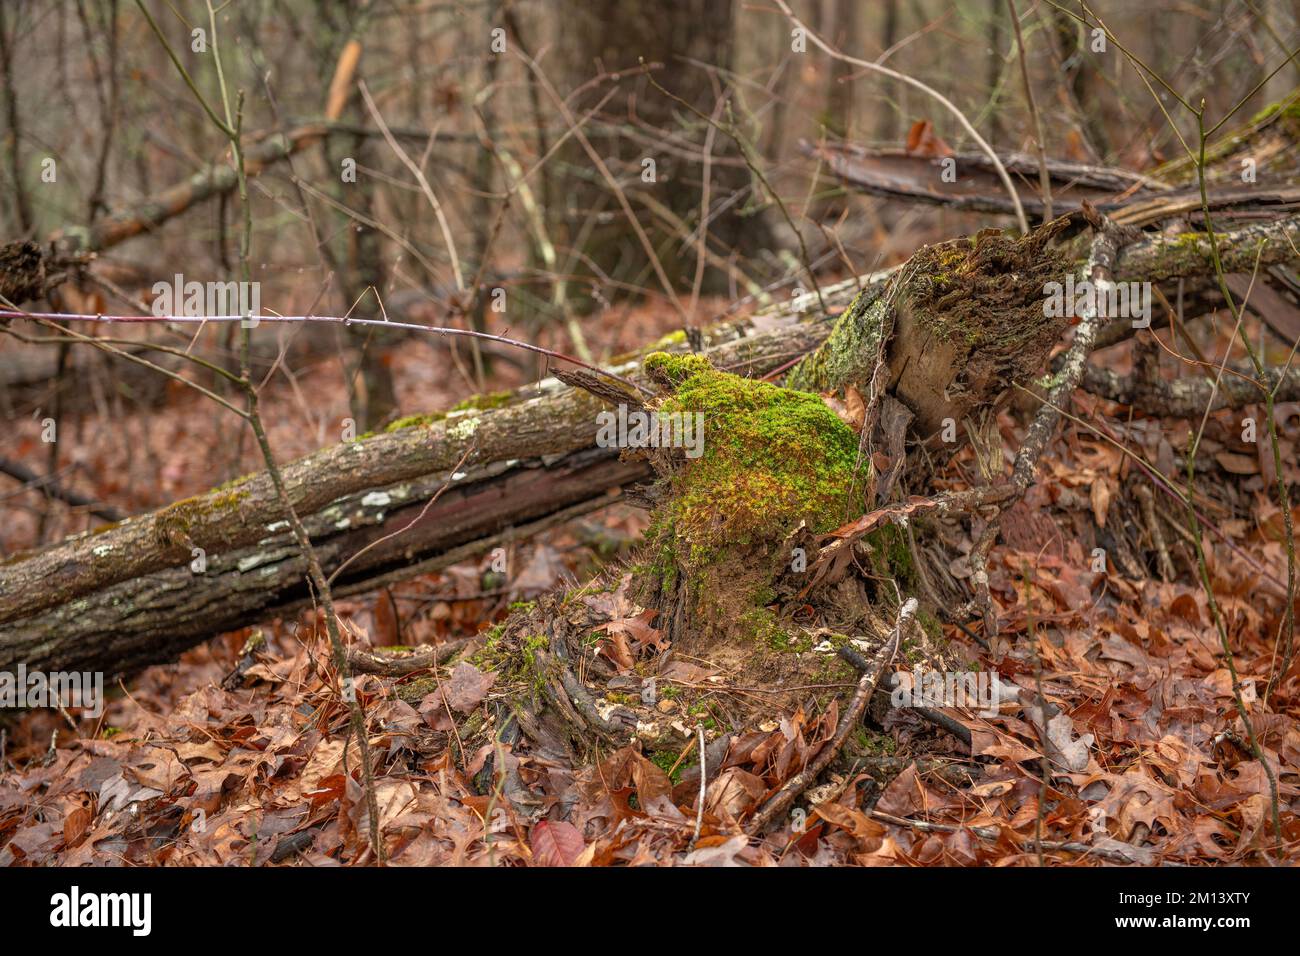 An aged fallen tree has moss and other growth forming as it lies in a moist, wet climate in Eastern Tennessee. Stock Photo